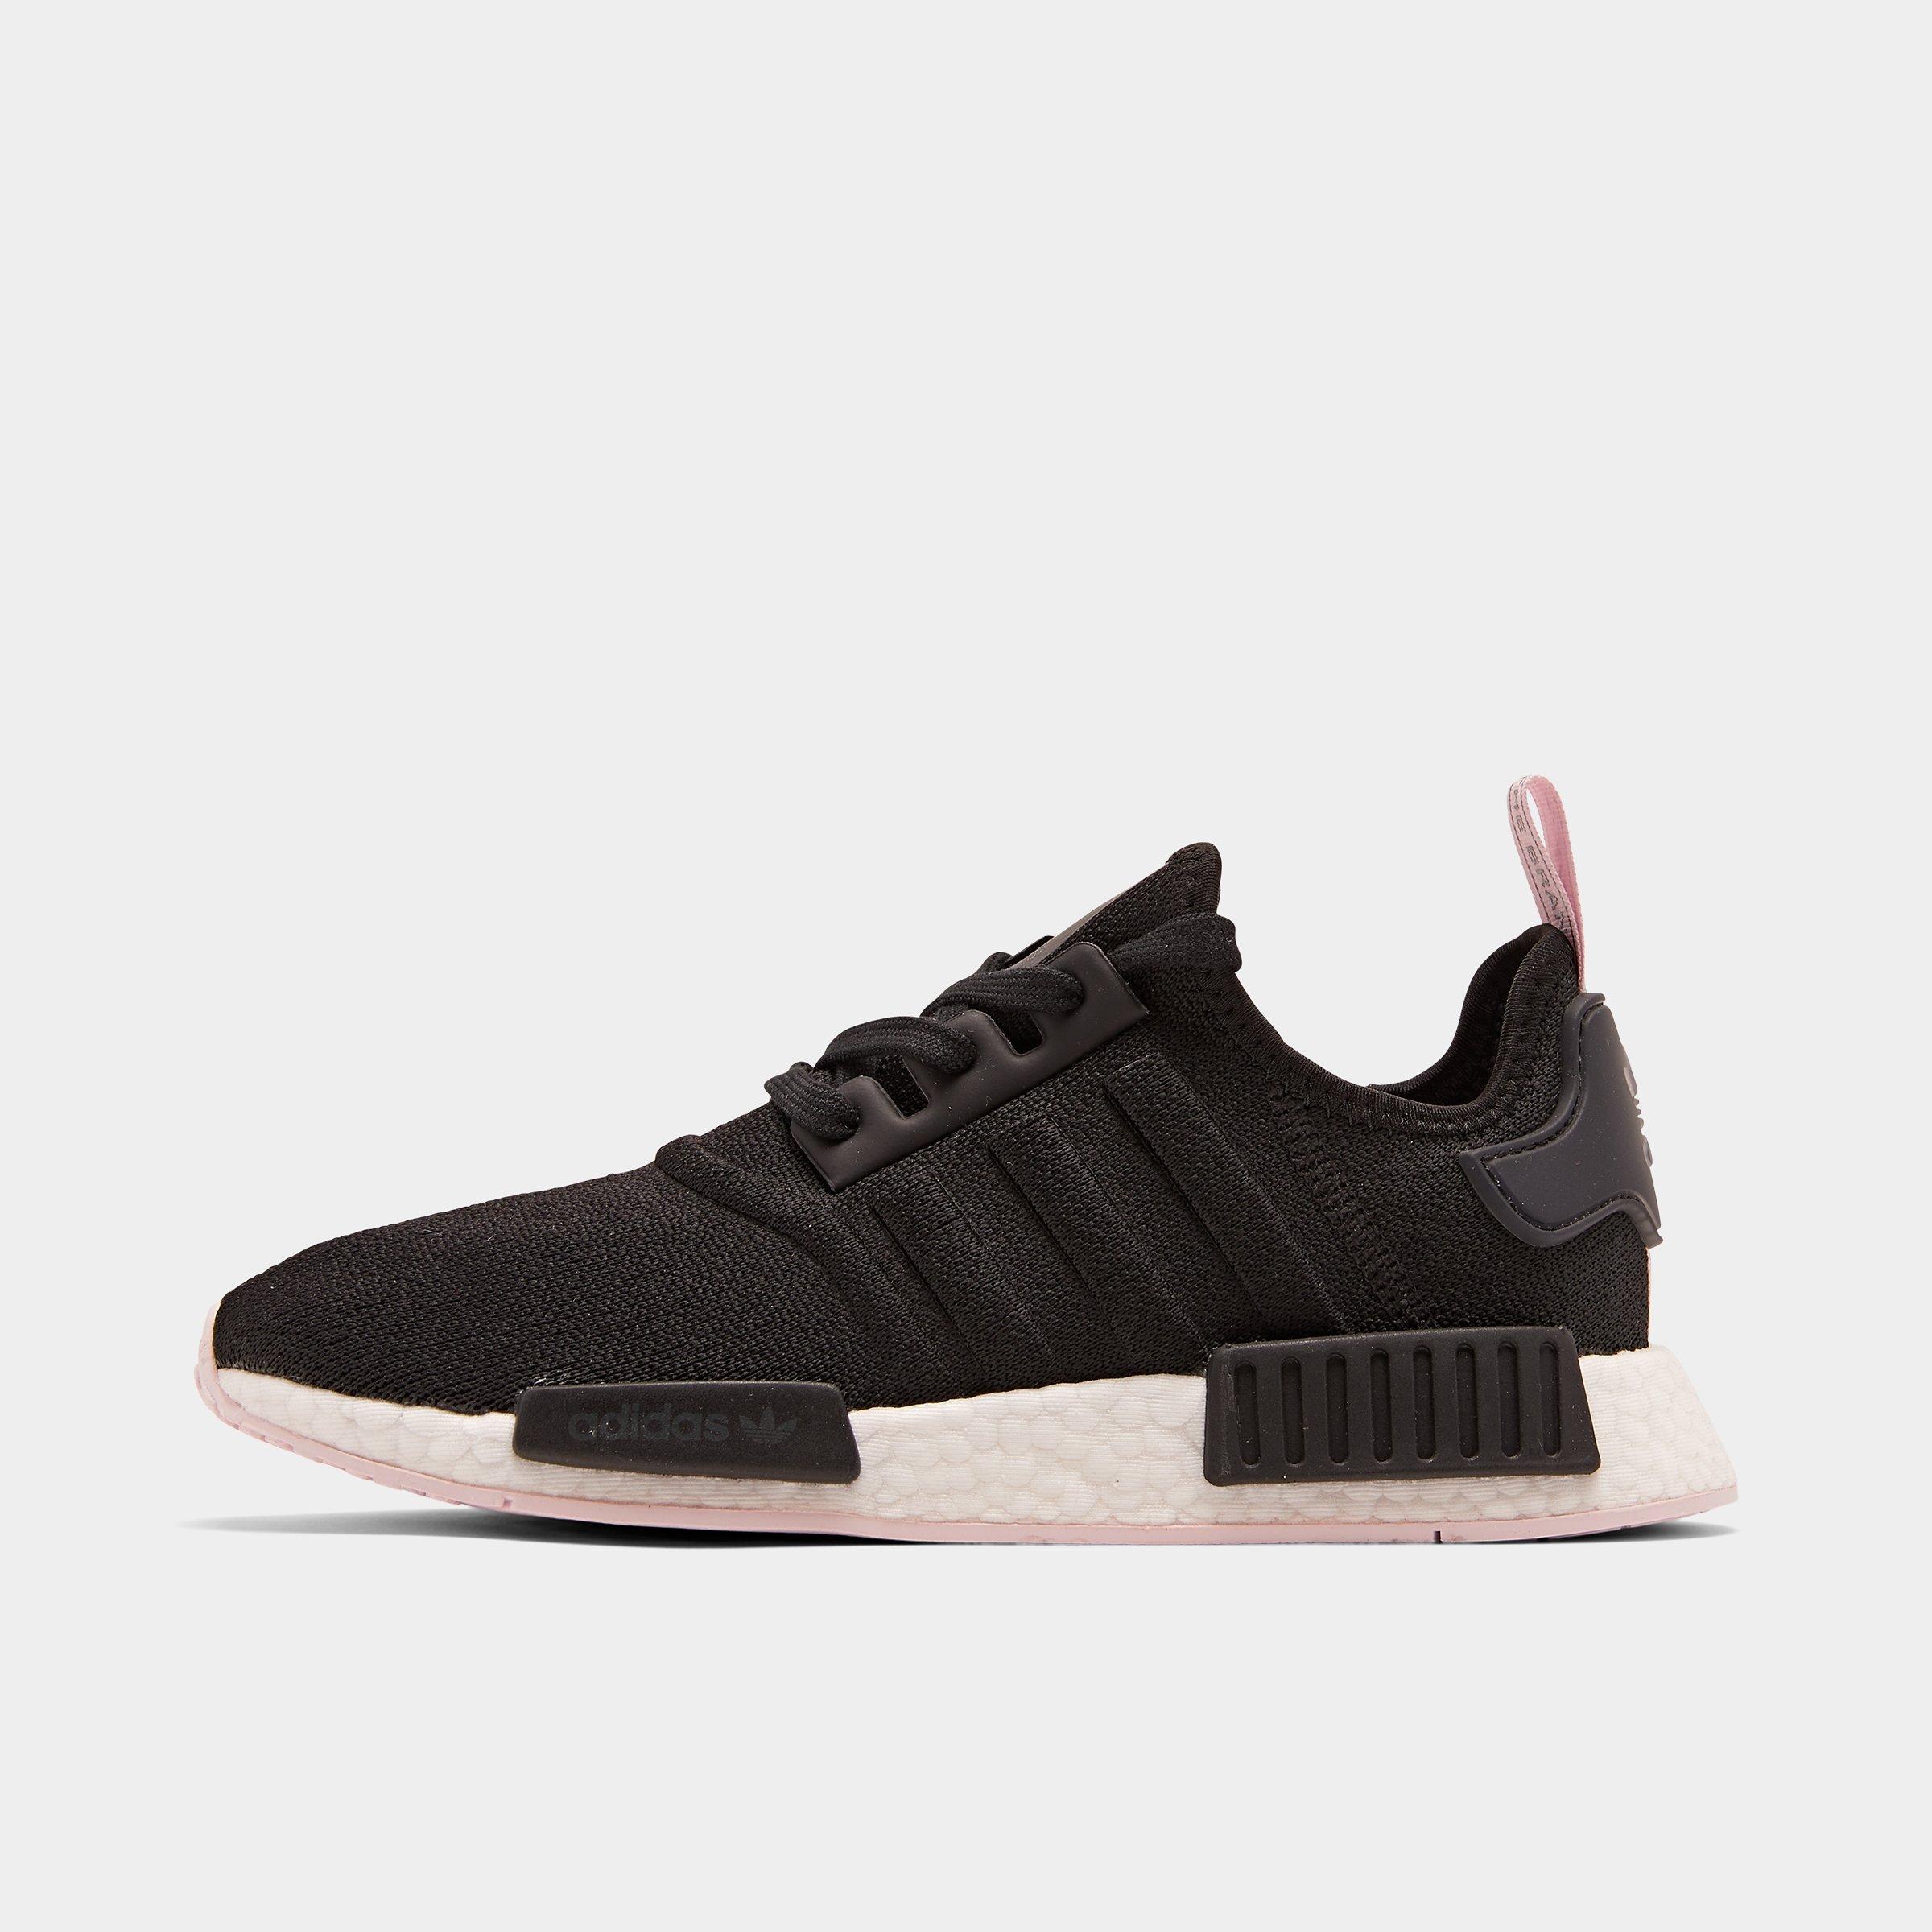 womens nmd_r1 shoes